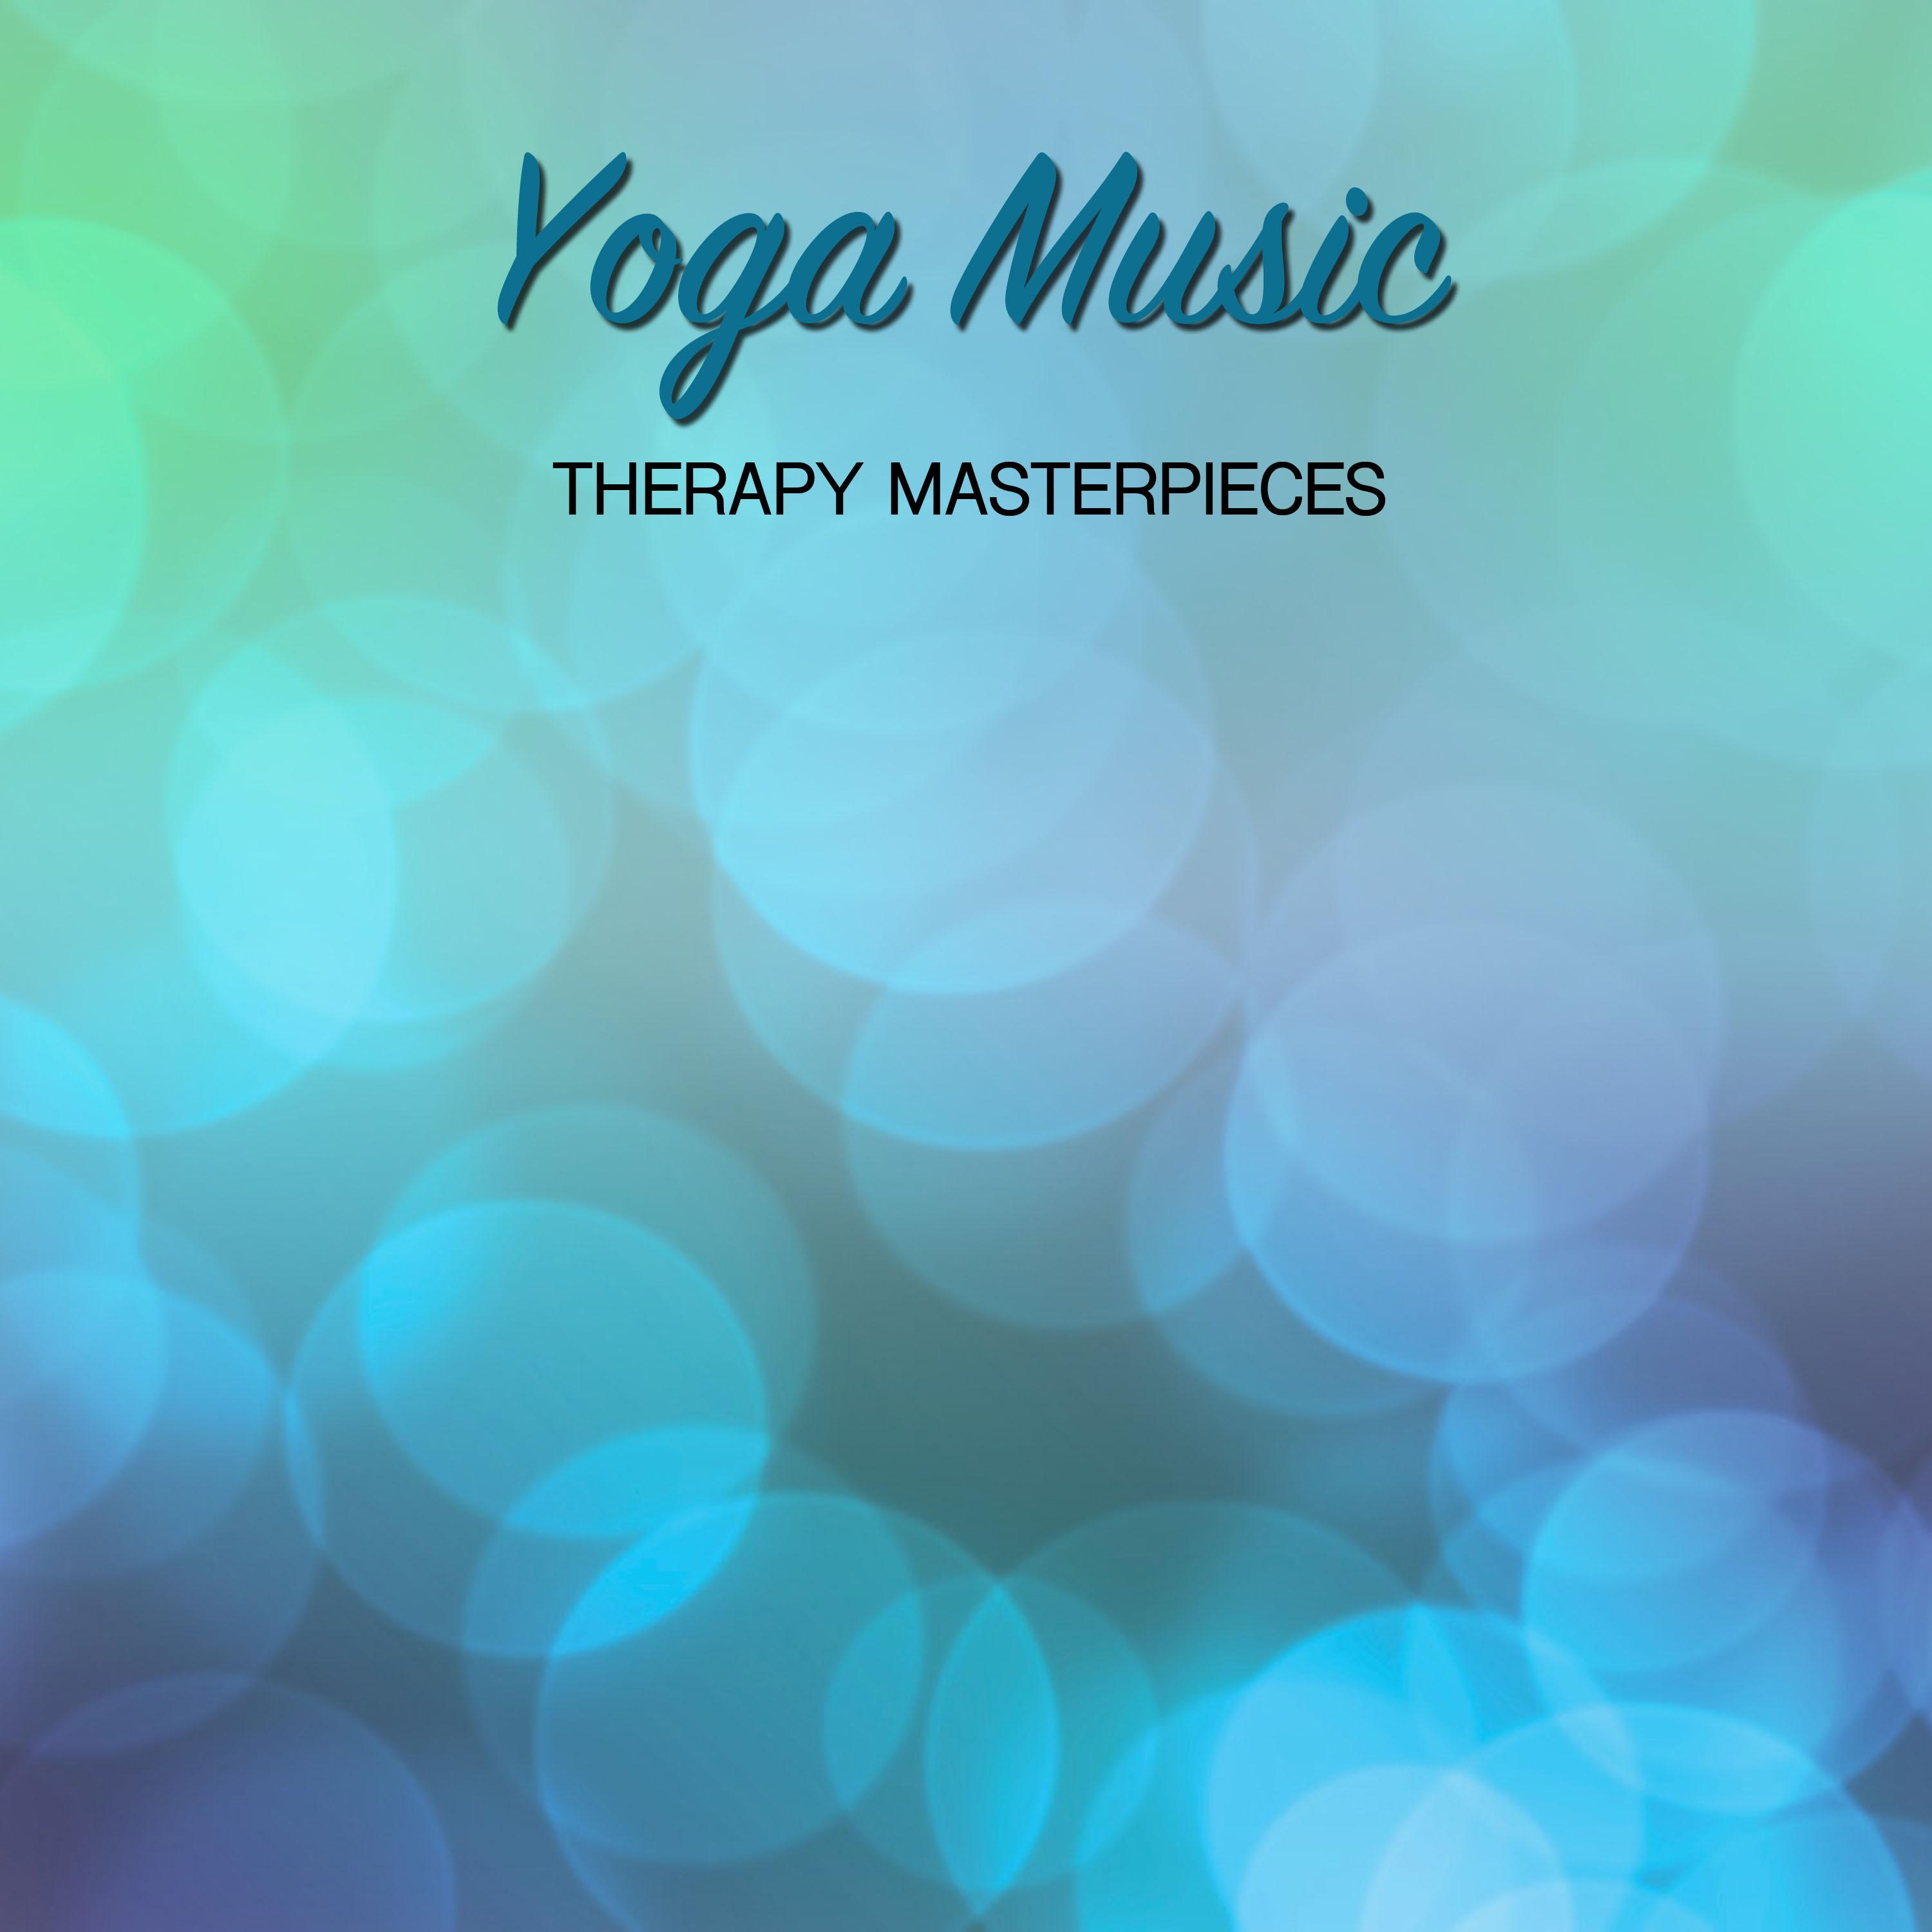 15 Yoga Music Therapy Masterpieces